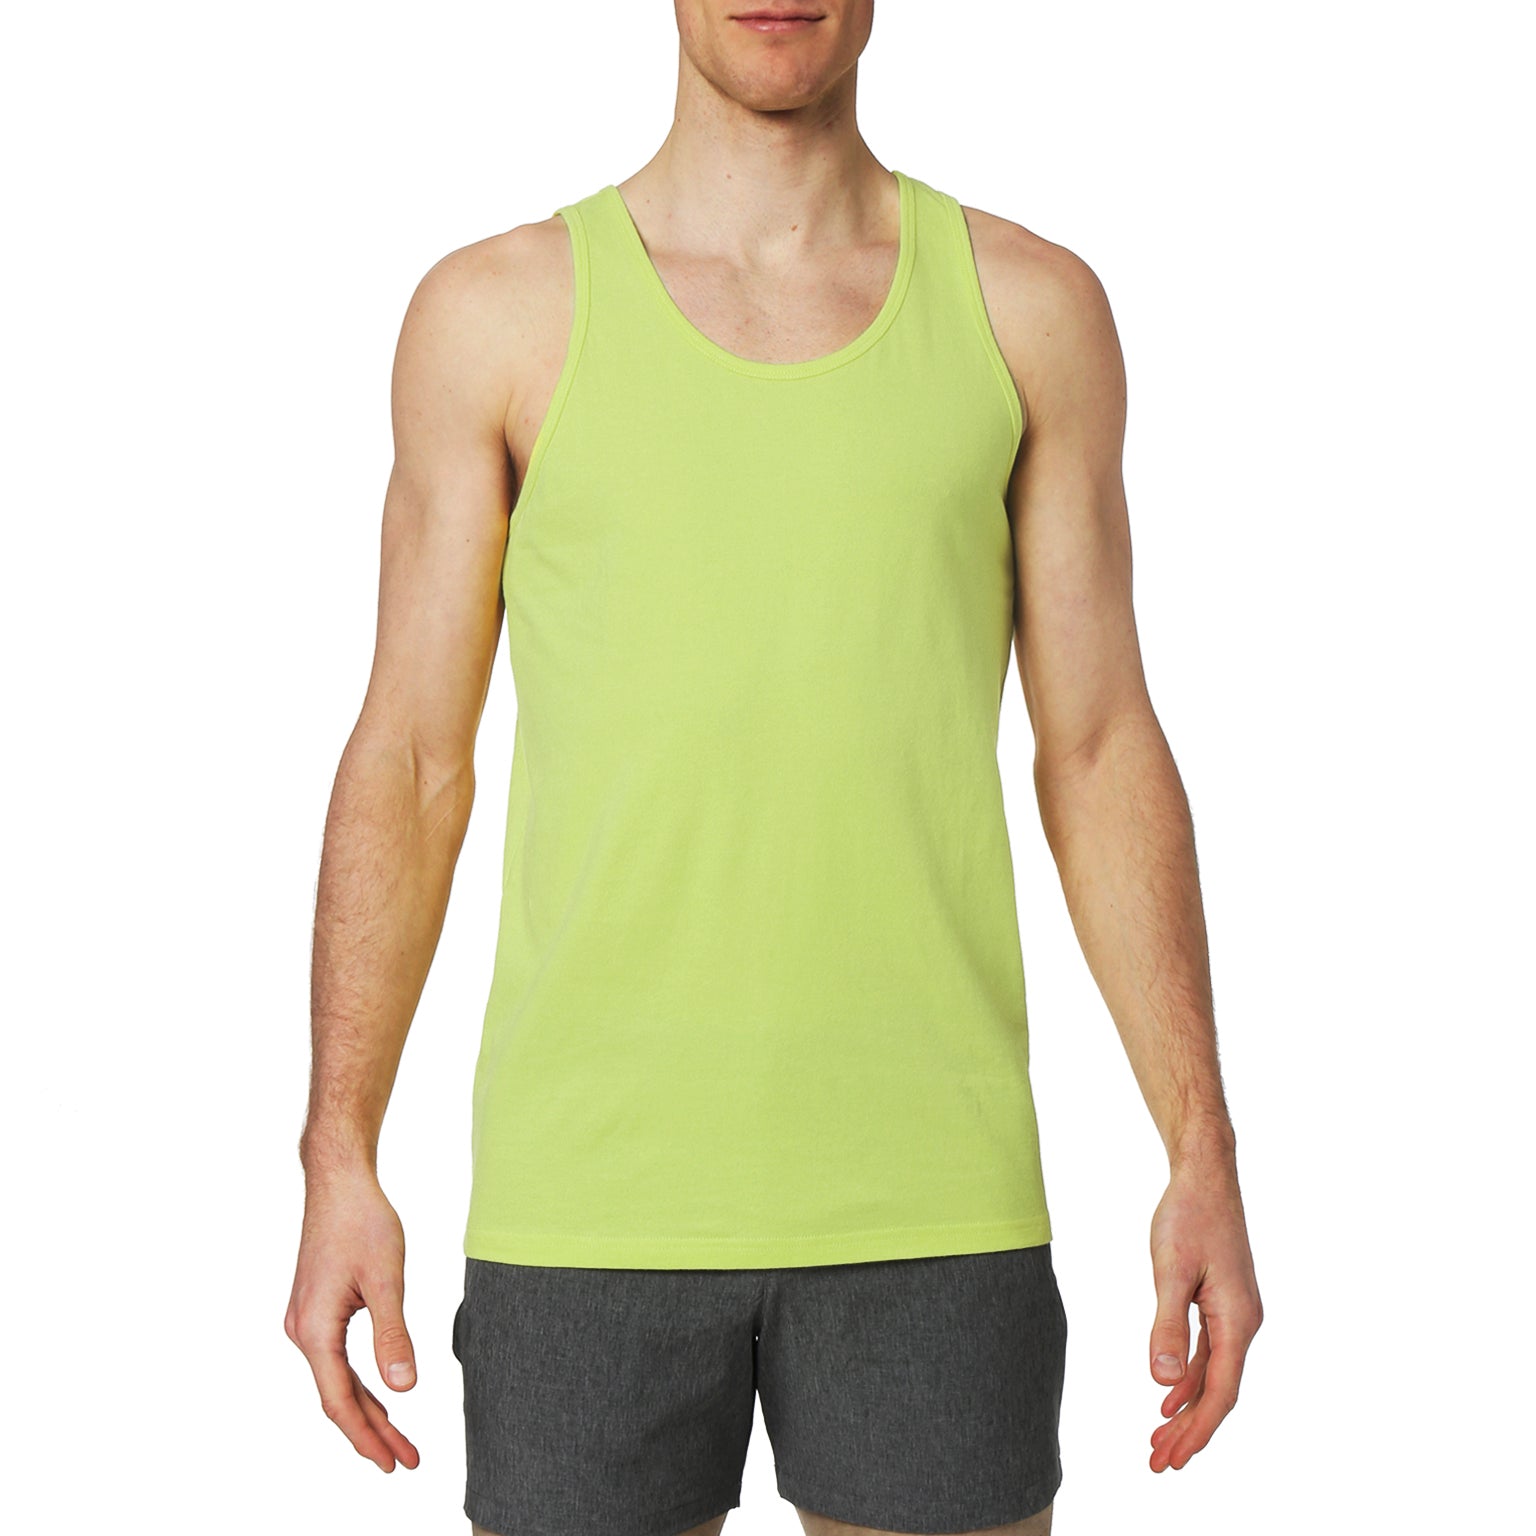 ACTIONWEAR Citron Solid Cotton Tank Top